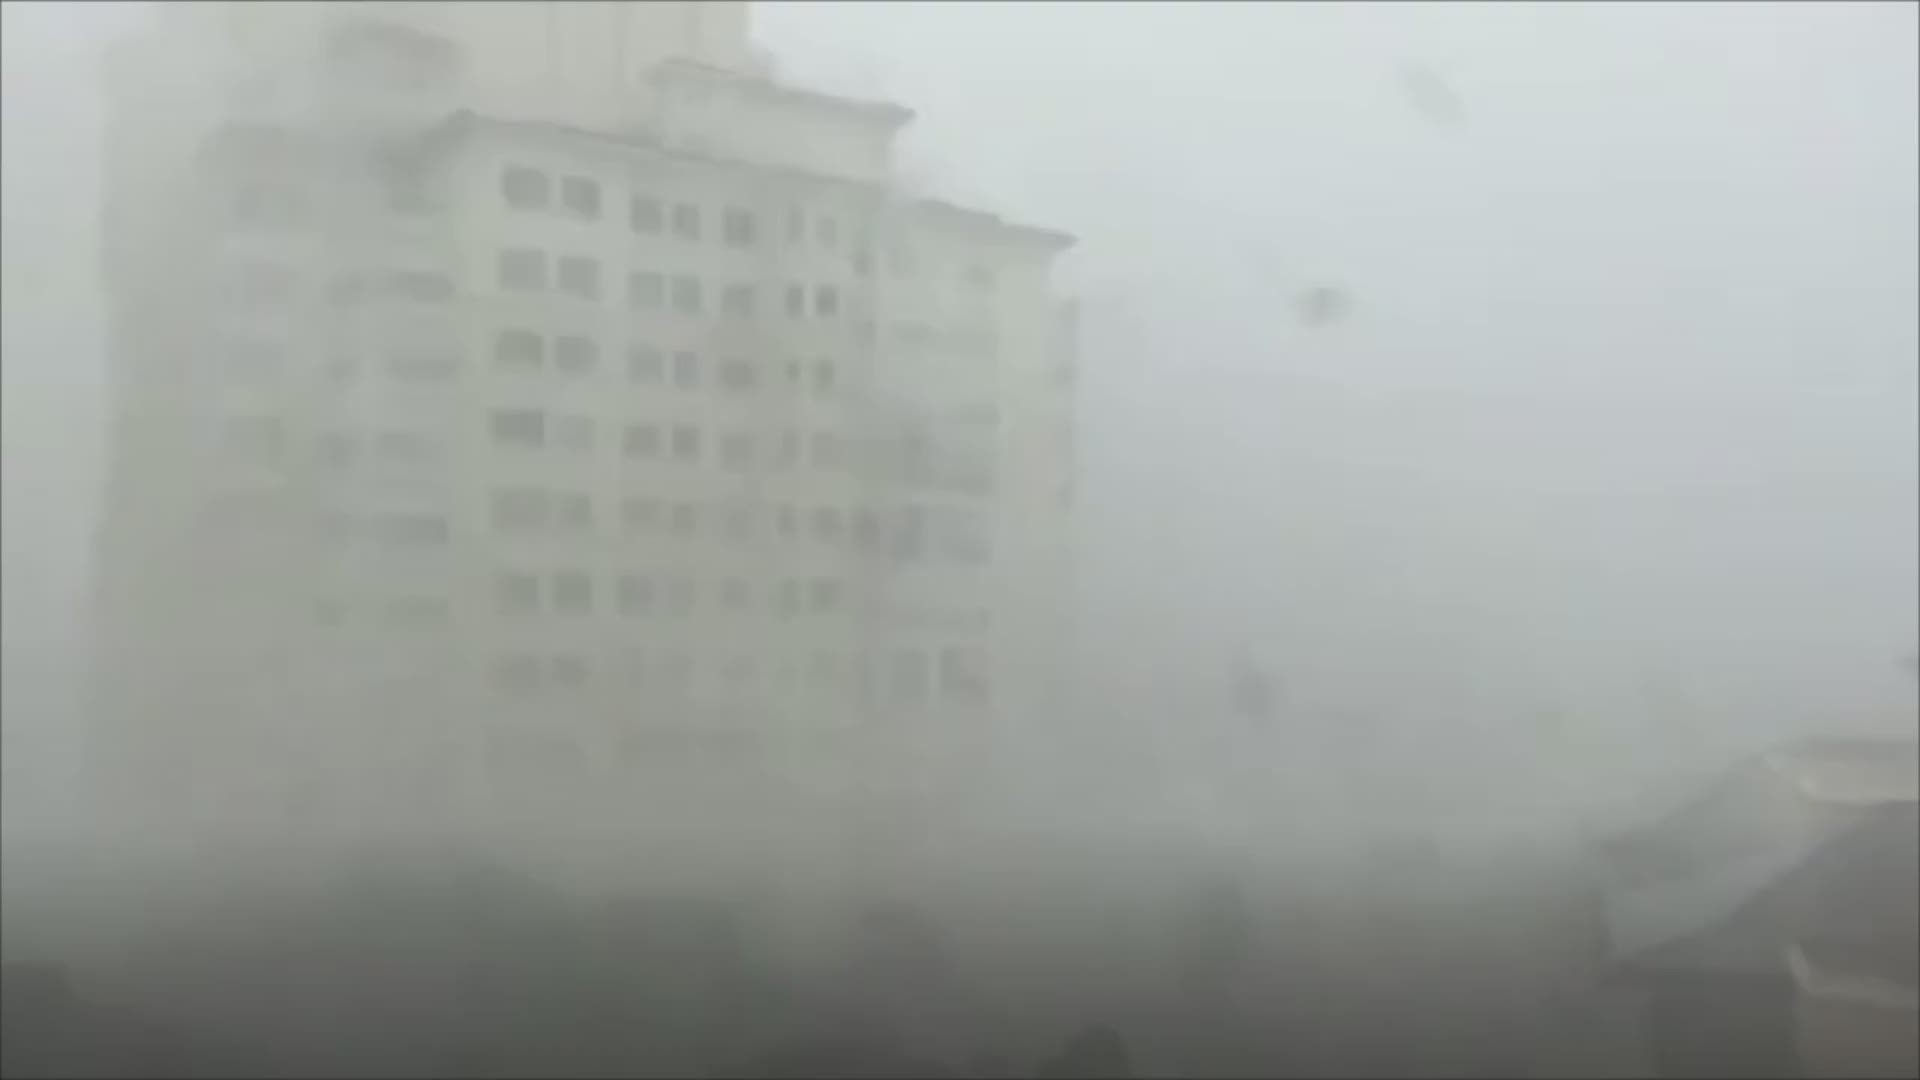 Watch as the eye of Hurricane Irma passes over Marco Island, Florida on Sunday, Sept. 10, 2017.  Video courtesy the Naples Daily News